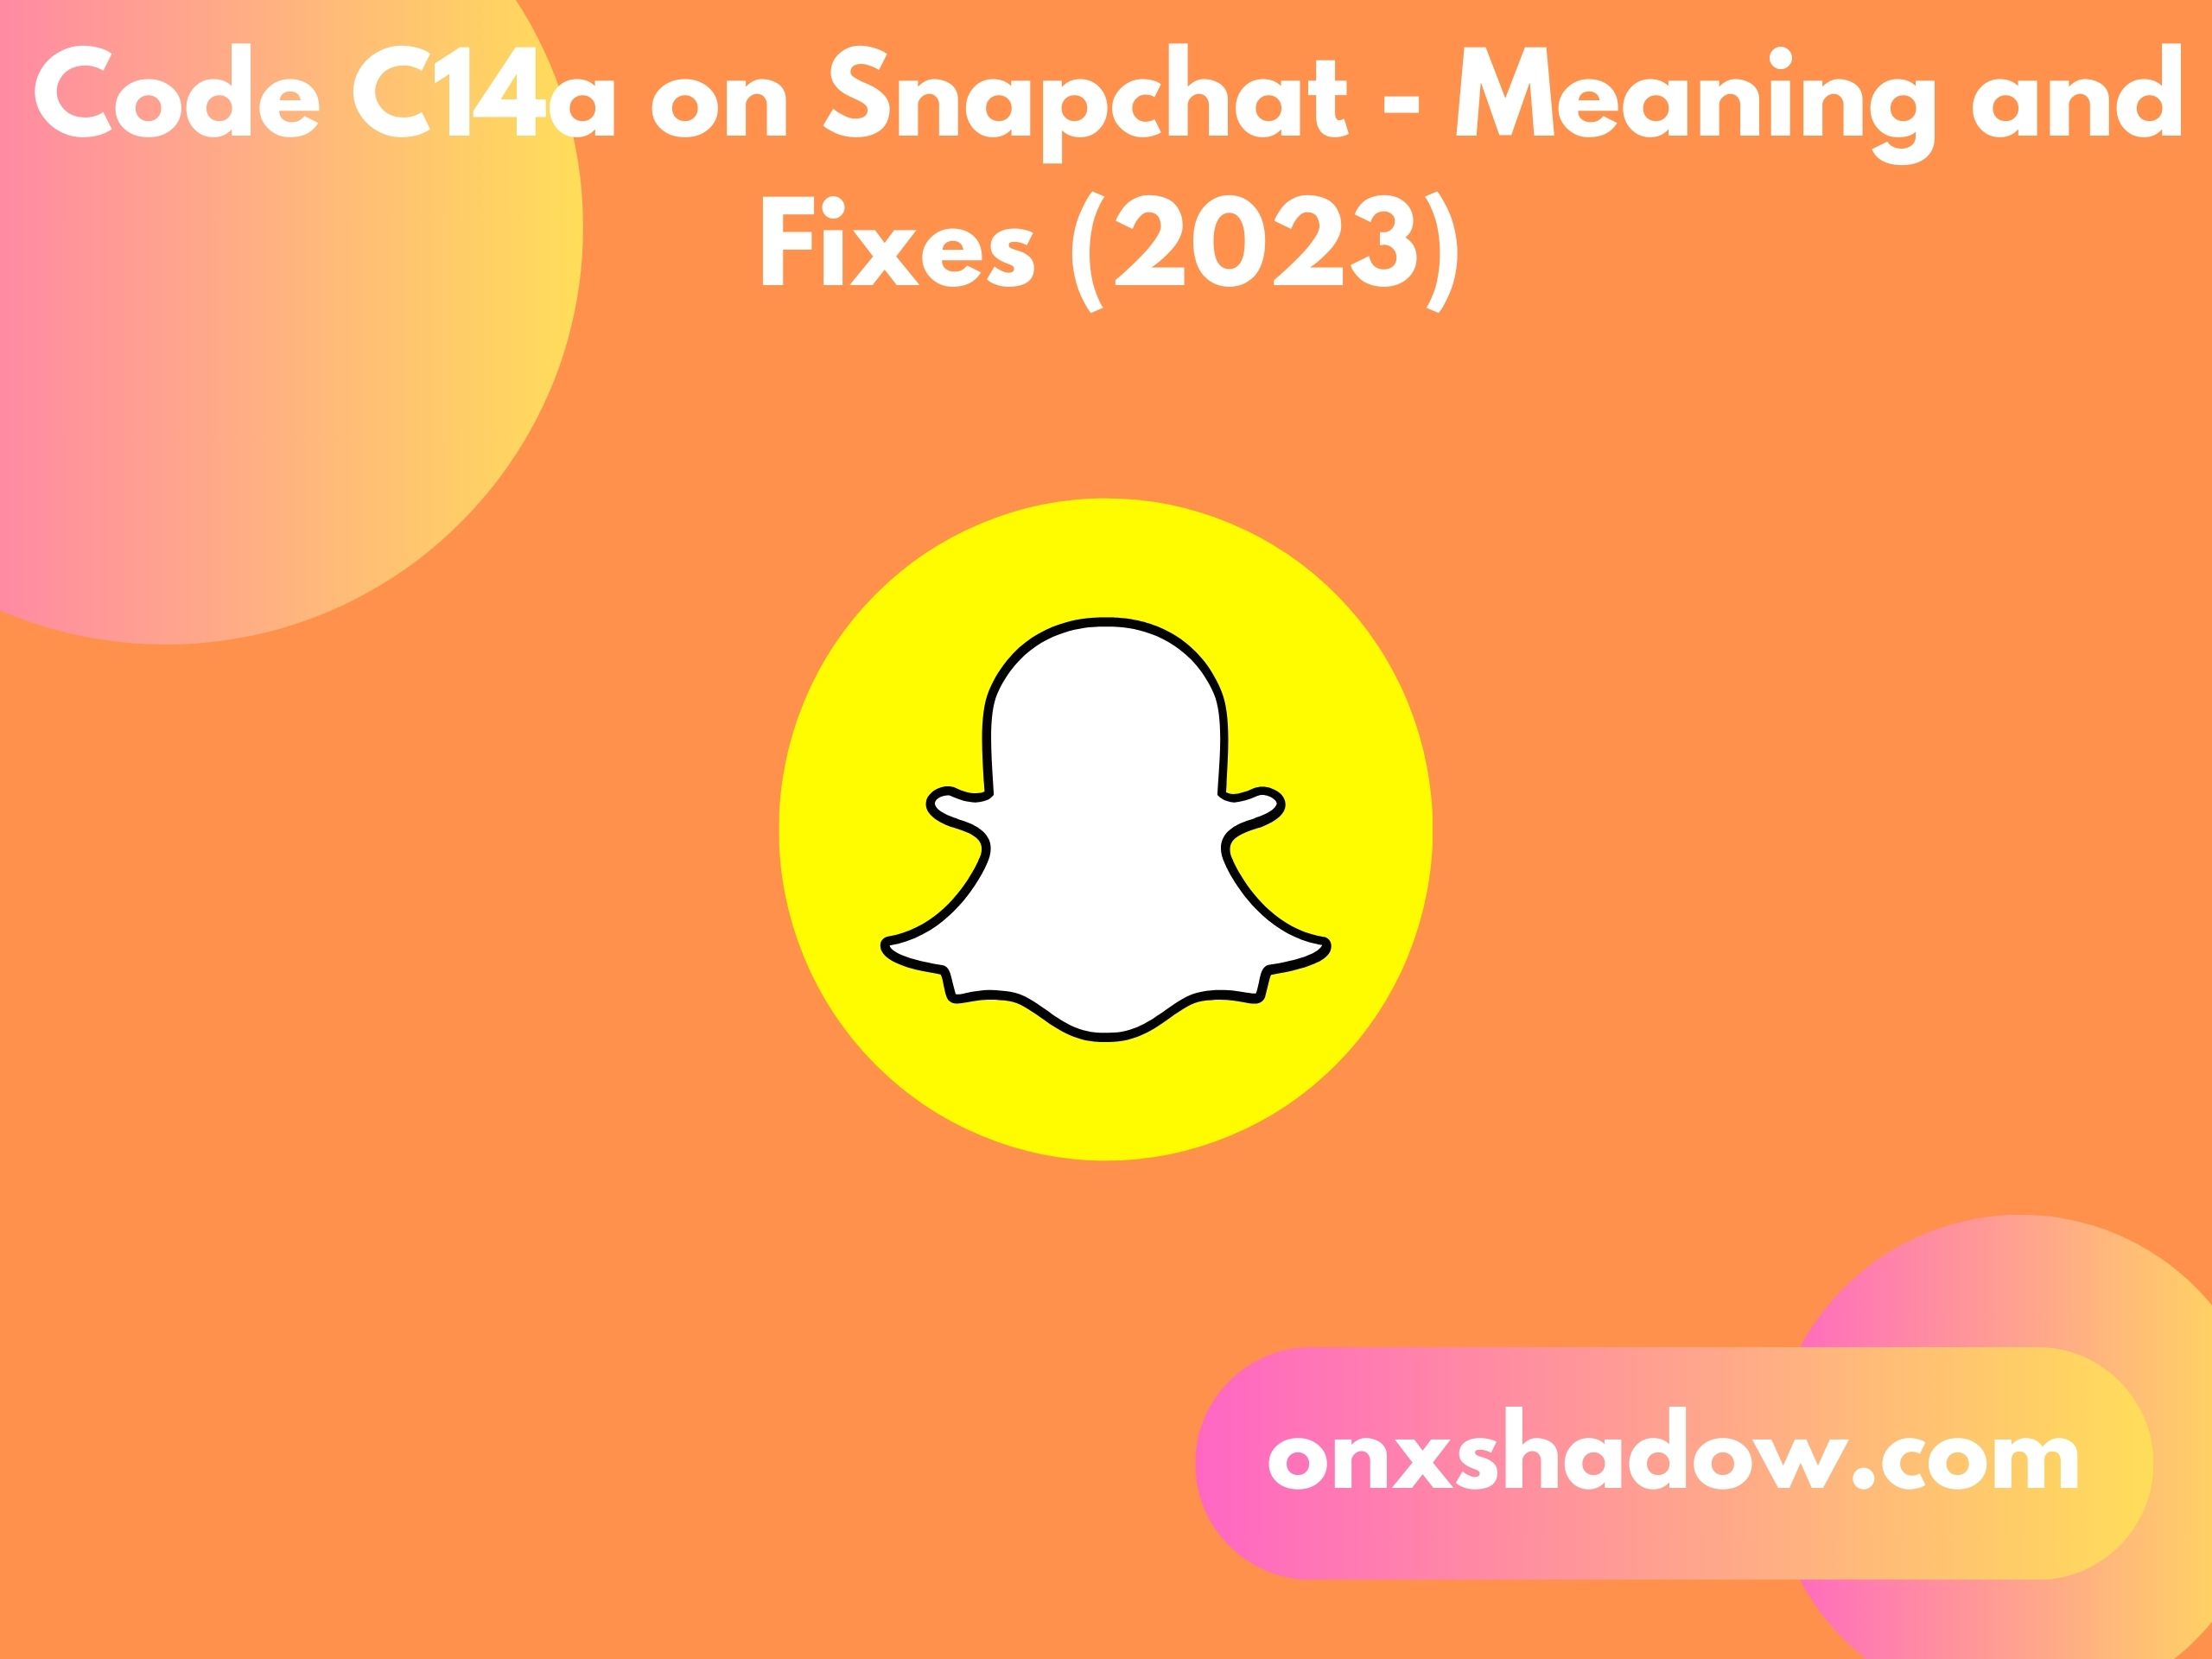 Code C14a on Snapchat - Meaning and Fixes (2023)